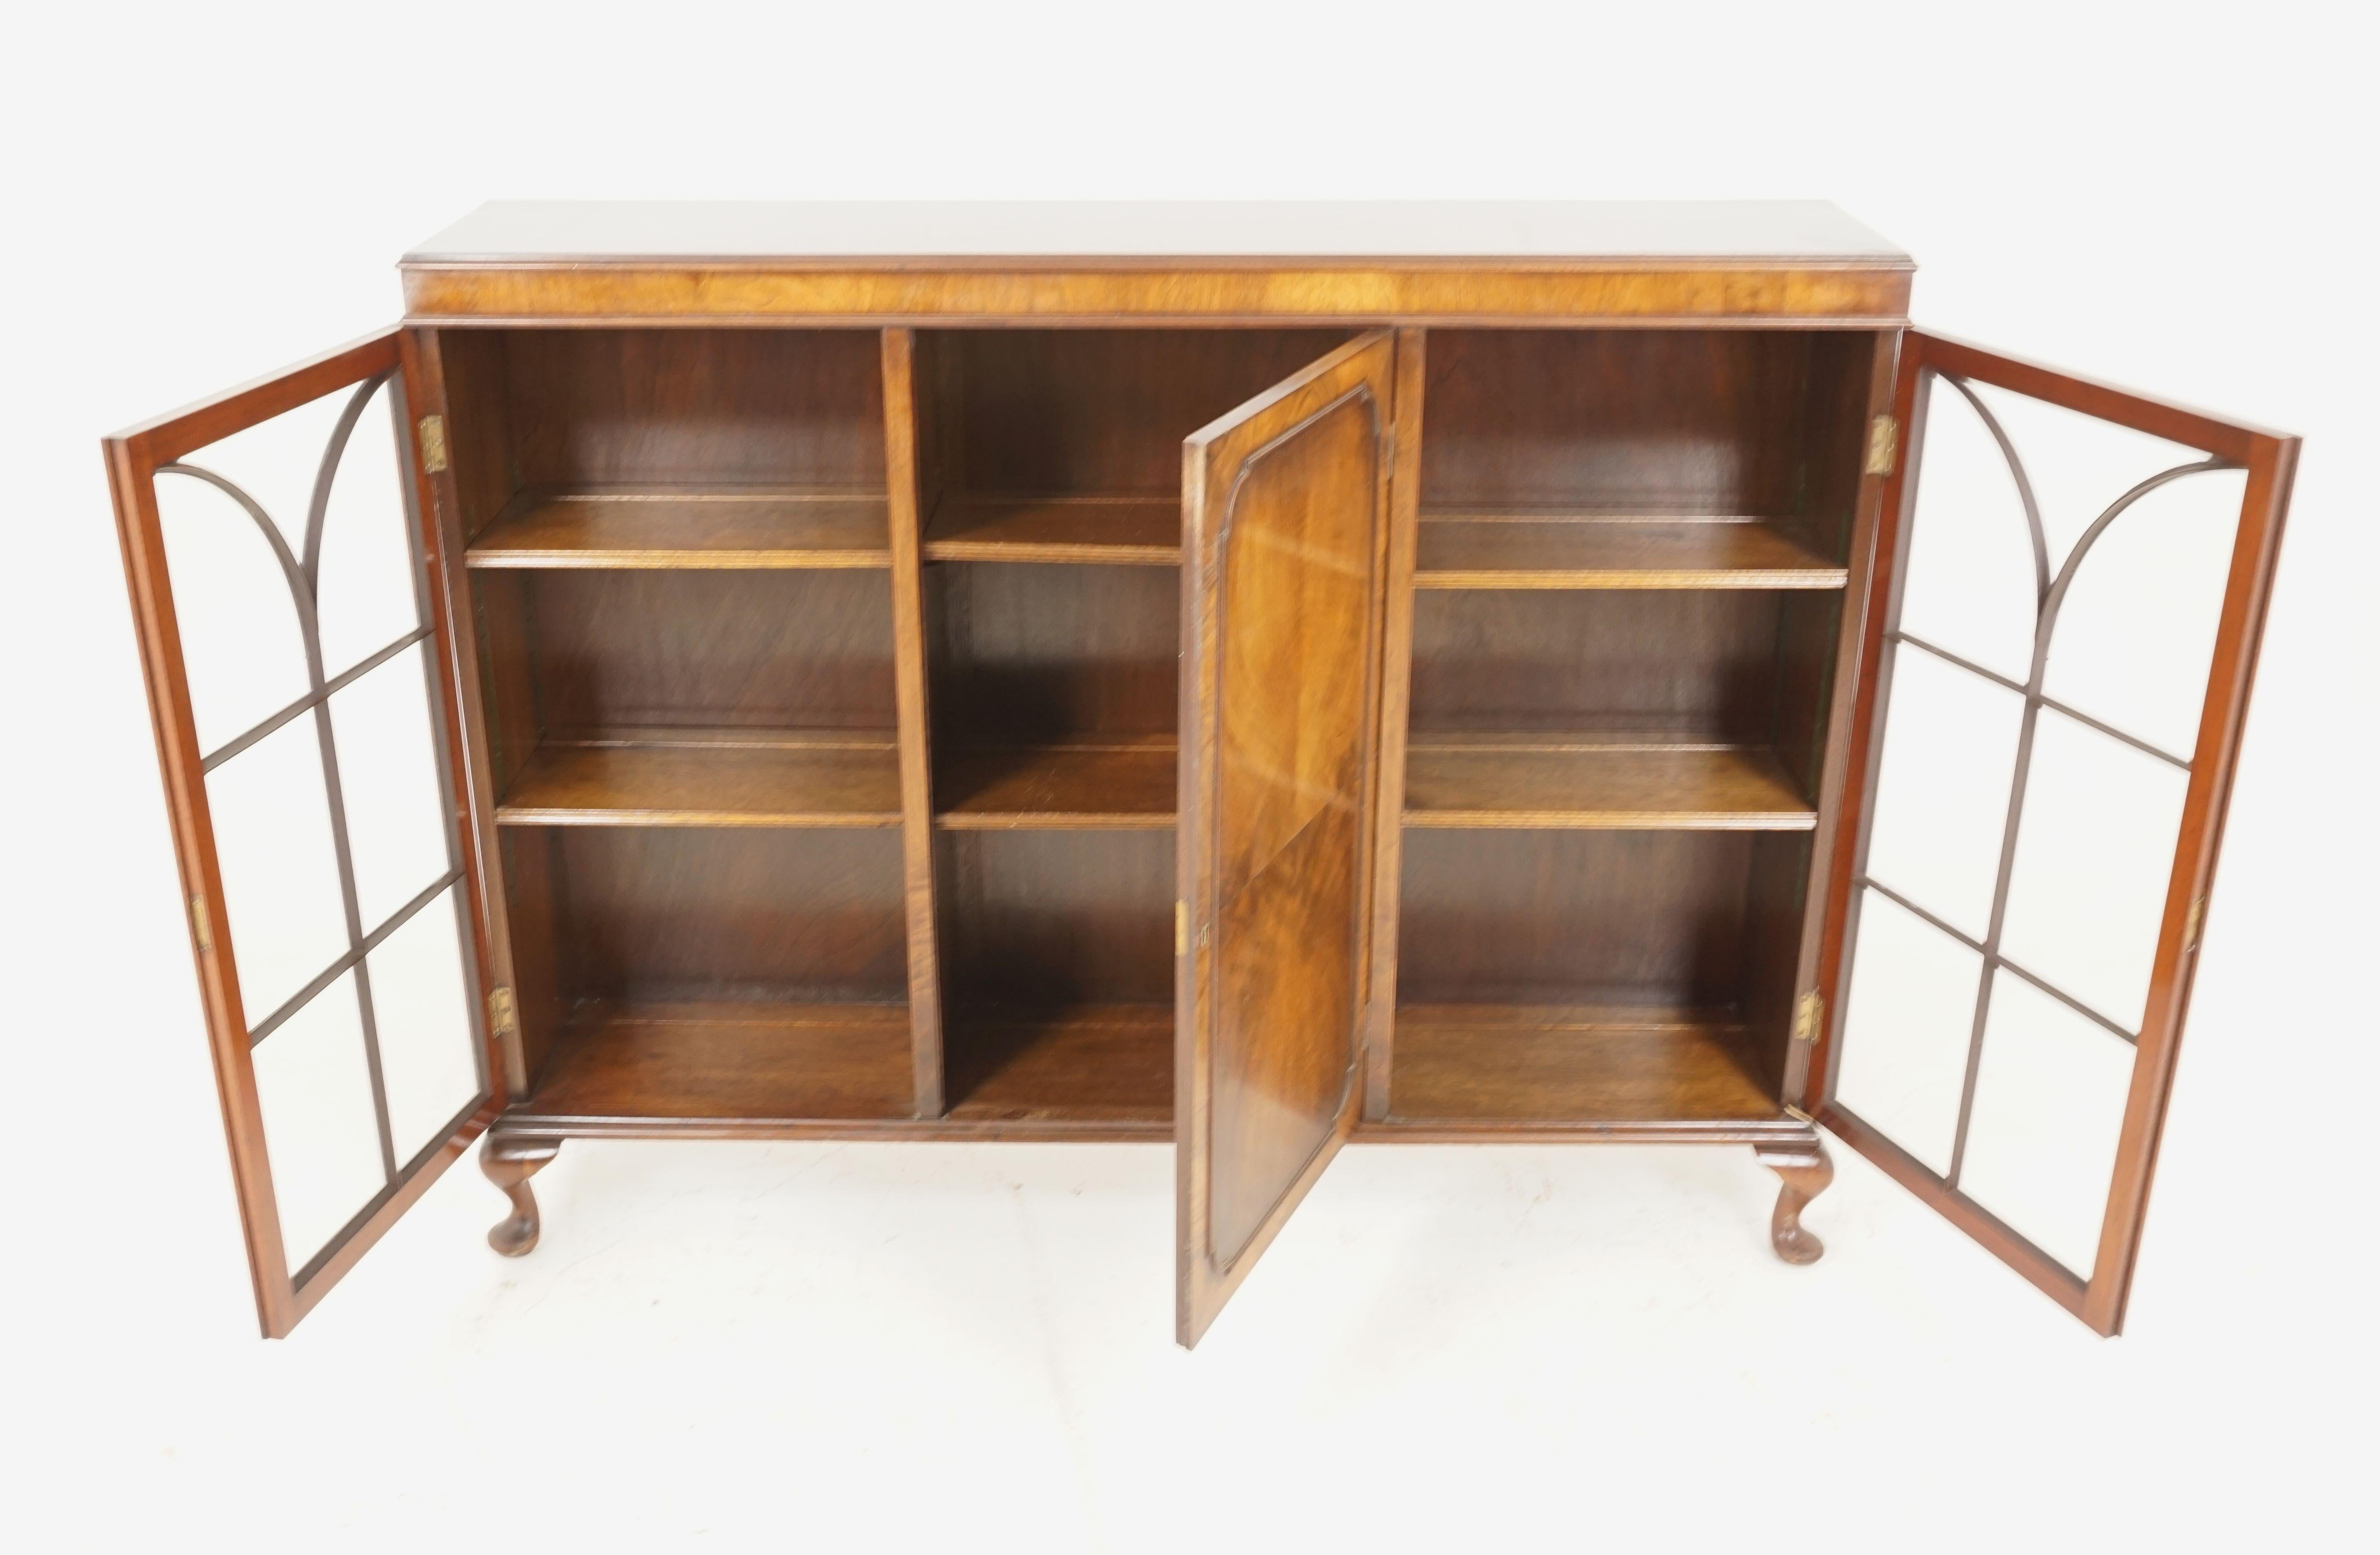 Antique walnut cabinet, three door display cabinet, bookshelf, Scotland 1920, B1923

Scotland 1920
Solid walnut and veneer
Original finish
Rectangular molded top
Central paneled door below with a pair of adjustable shelves
Flanked by a pair